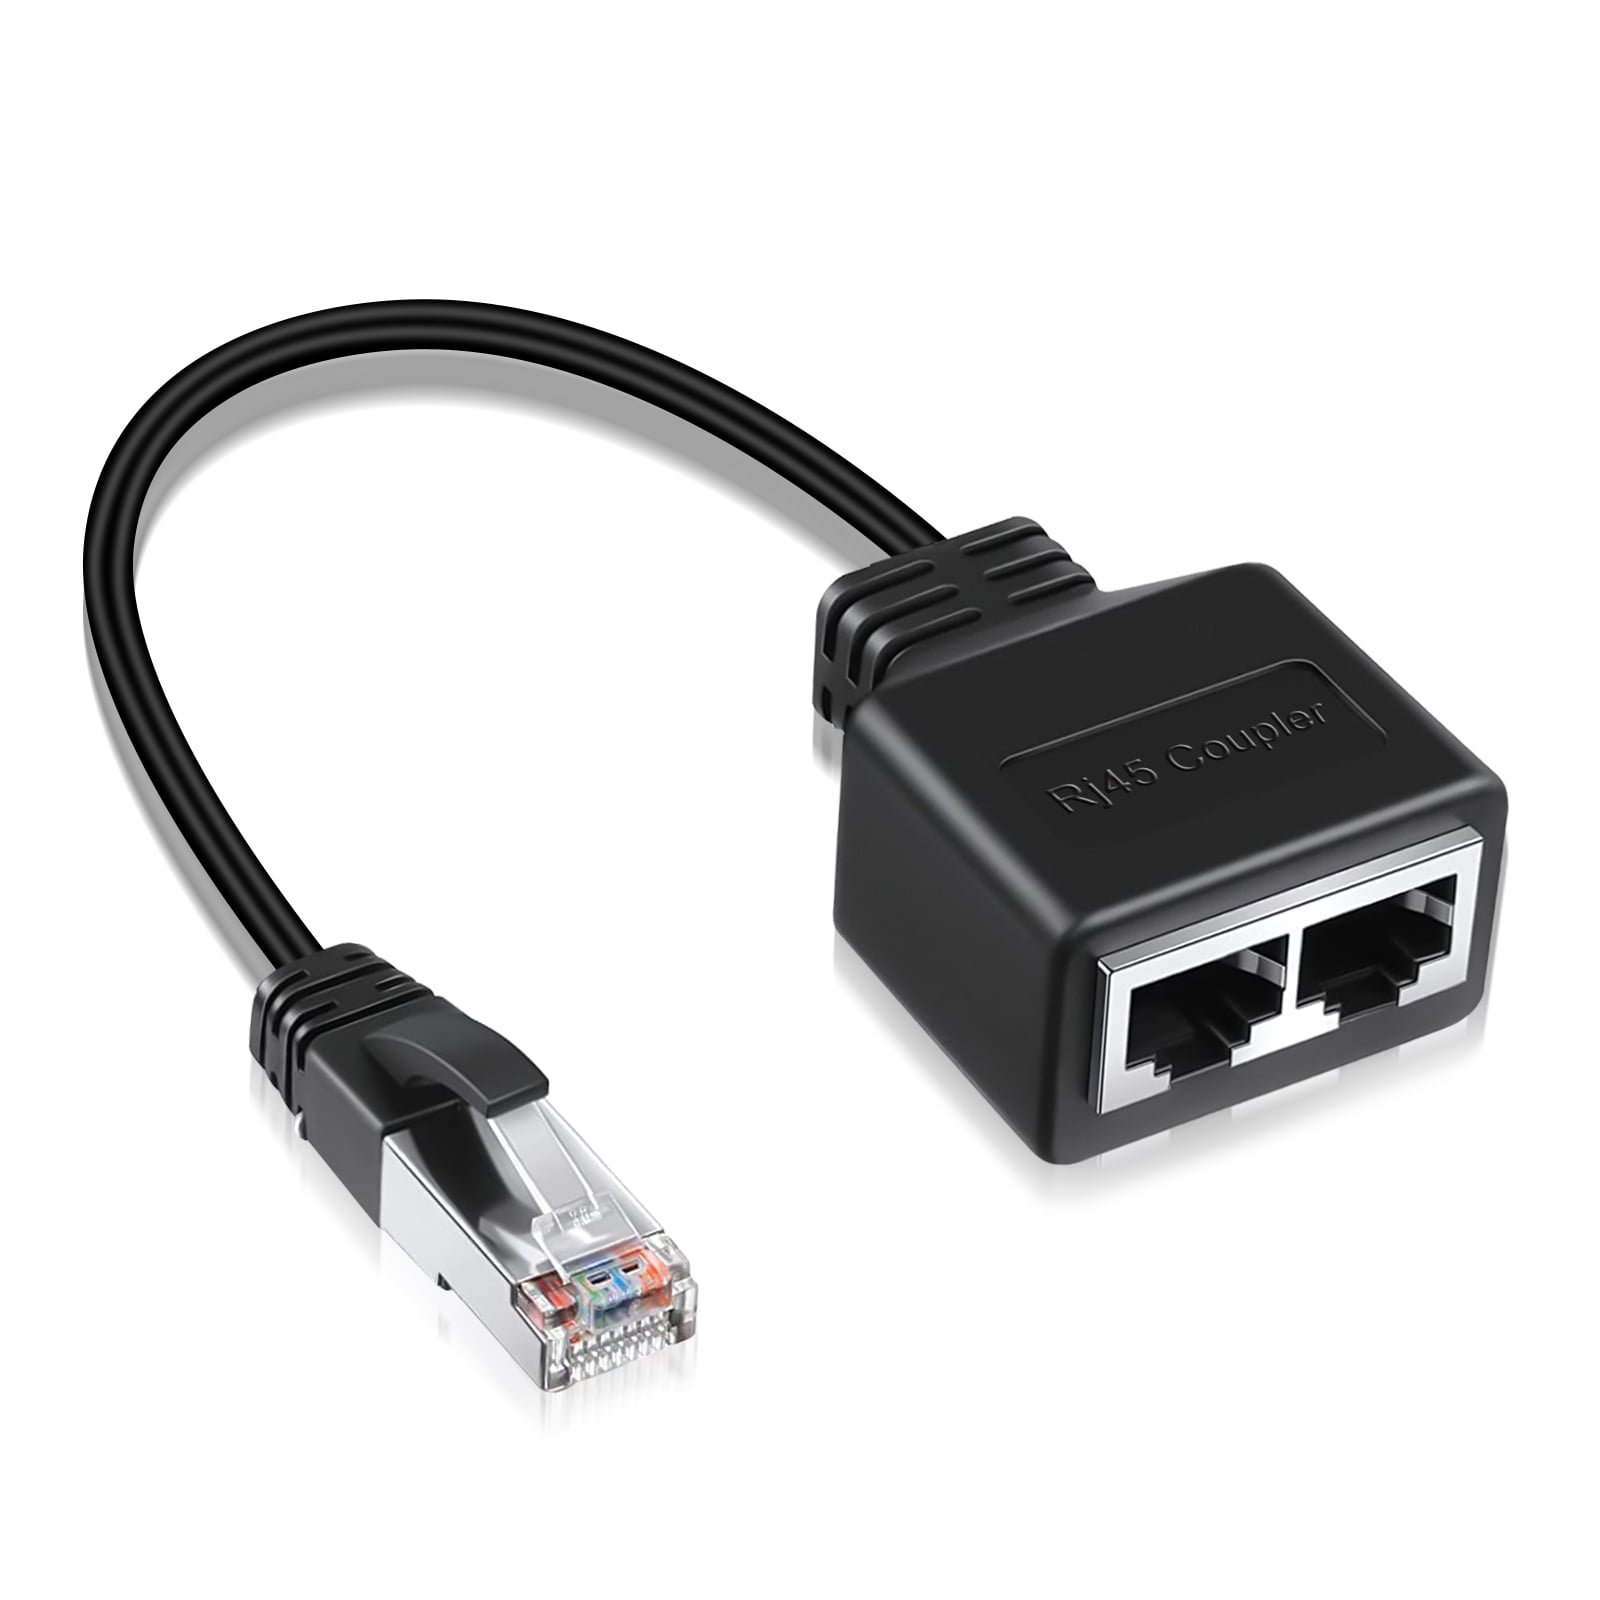 RJ45 Splitter Adapter LAN Ethernet Cable 1 To 2 Way Internet Connector  Extension